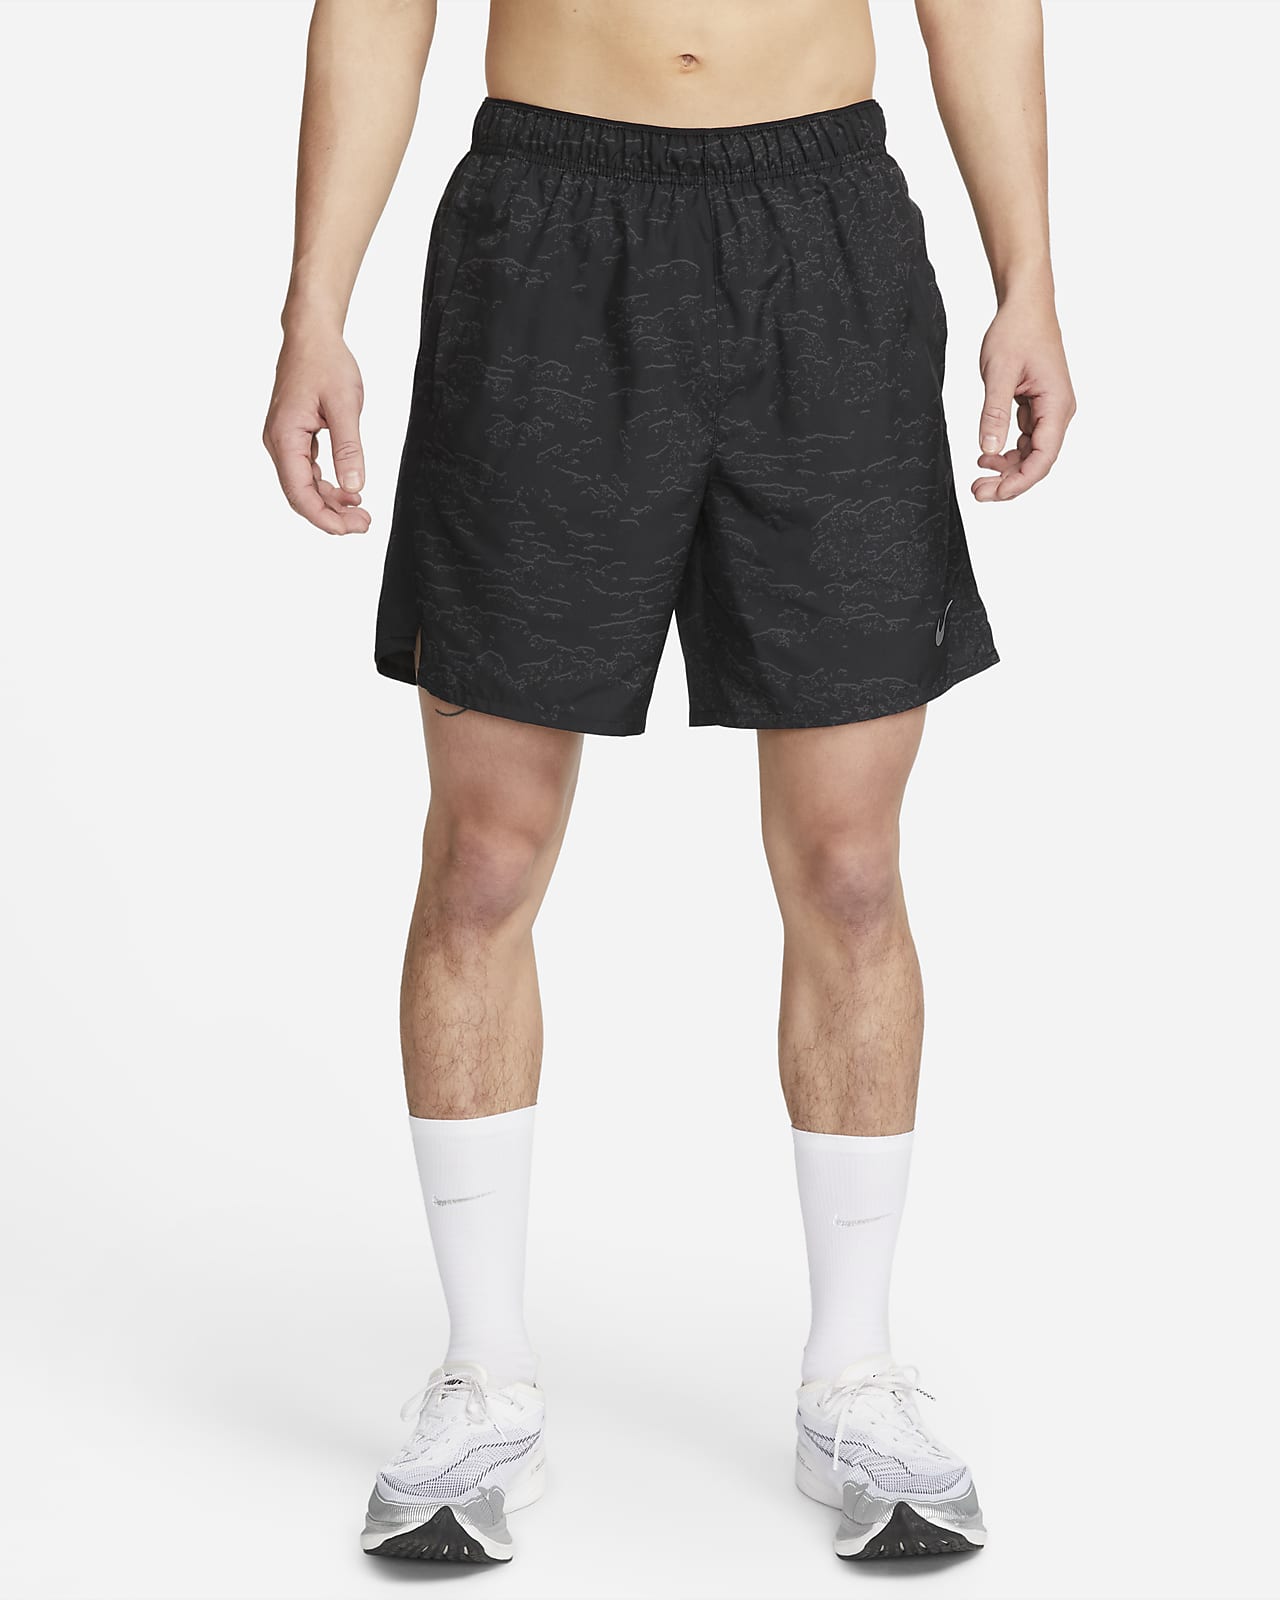 Nike Dri-FIT Run Division Challenger Men's 18cm (approx.) Brief-Lined Running Shorts